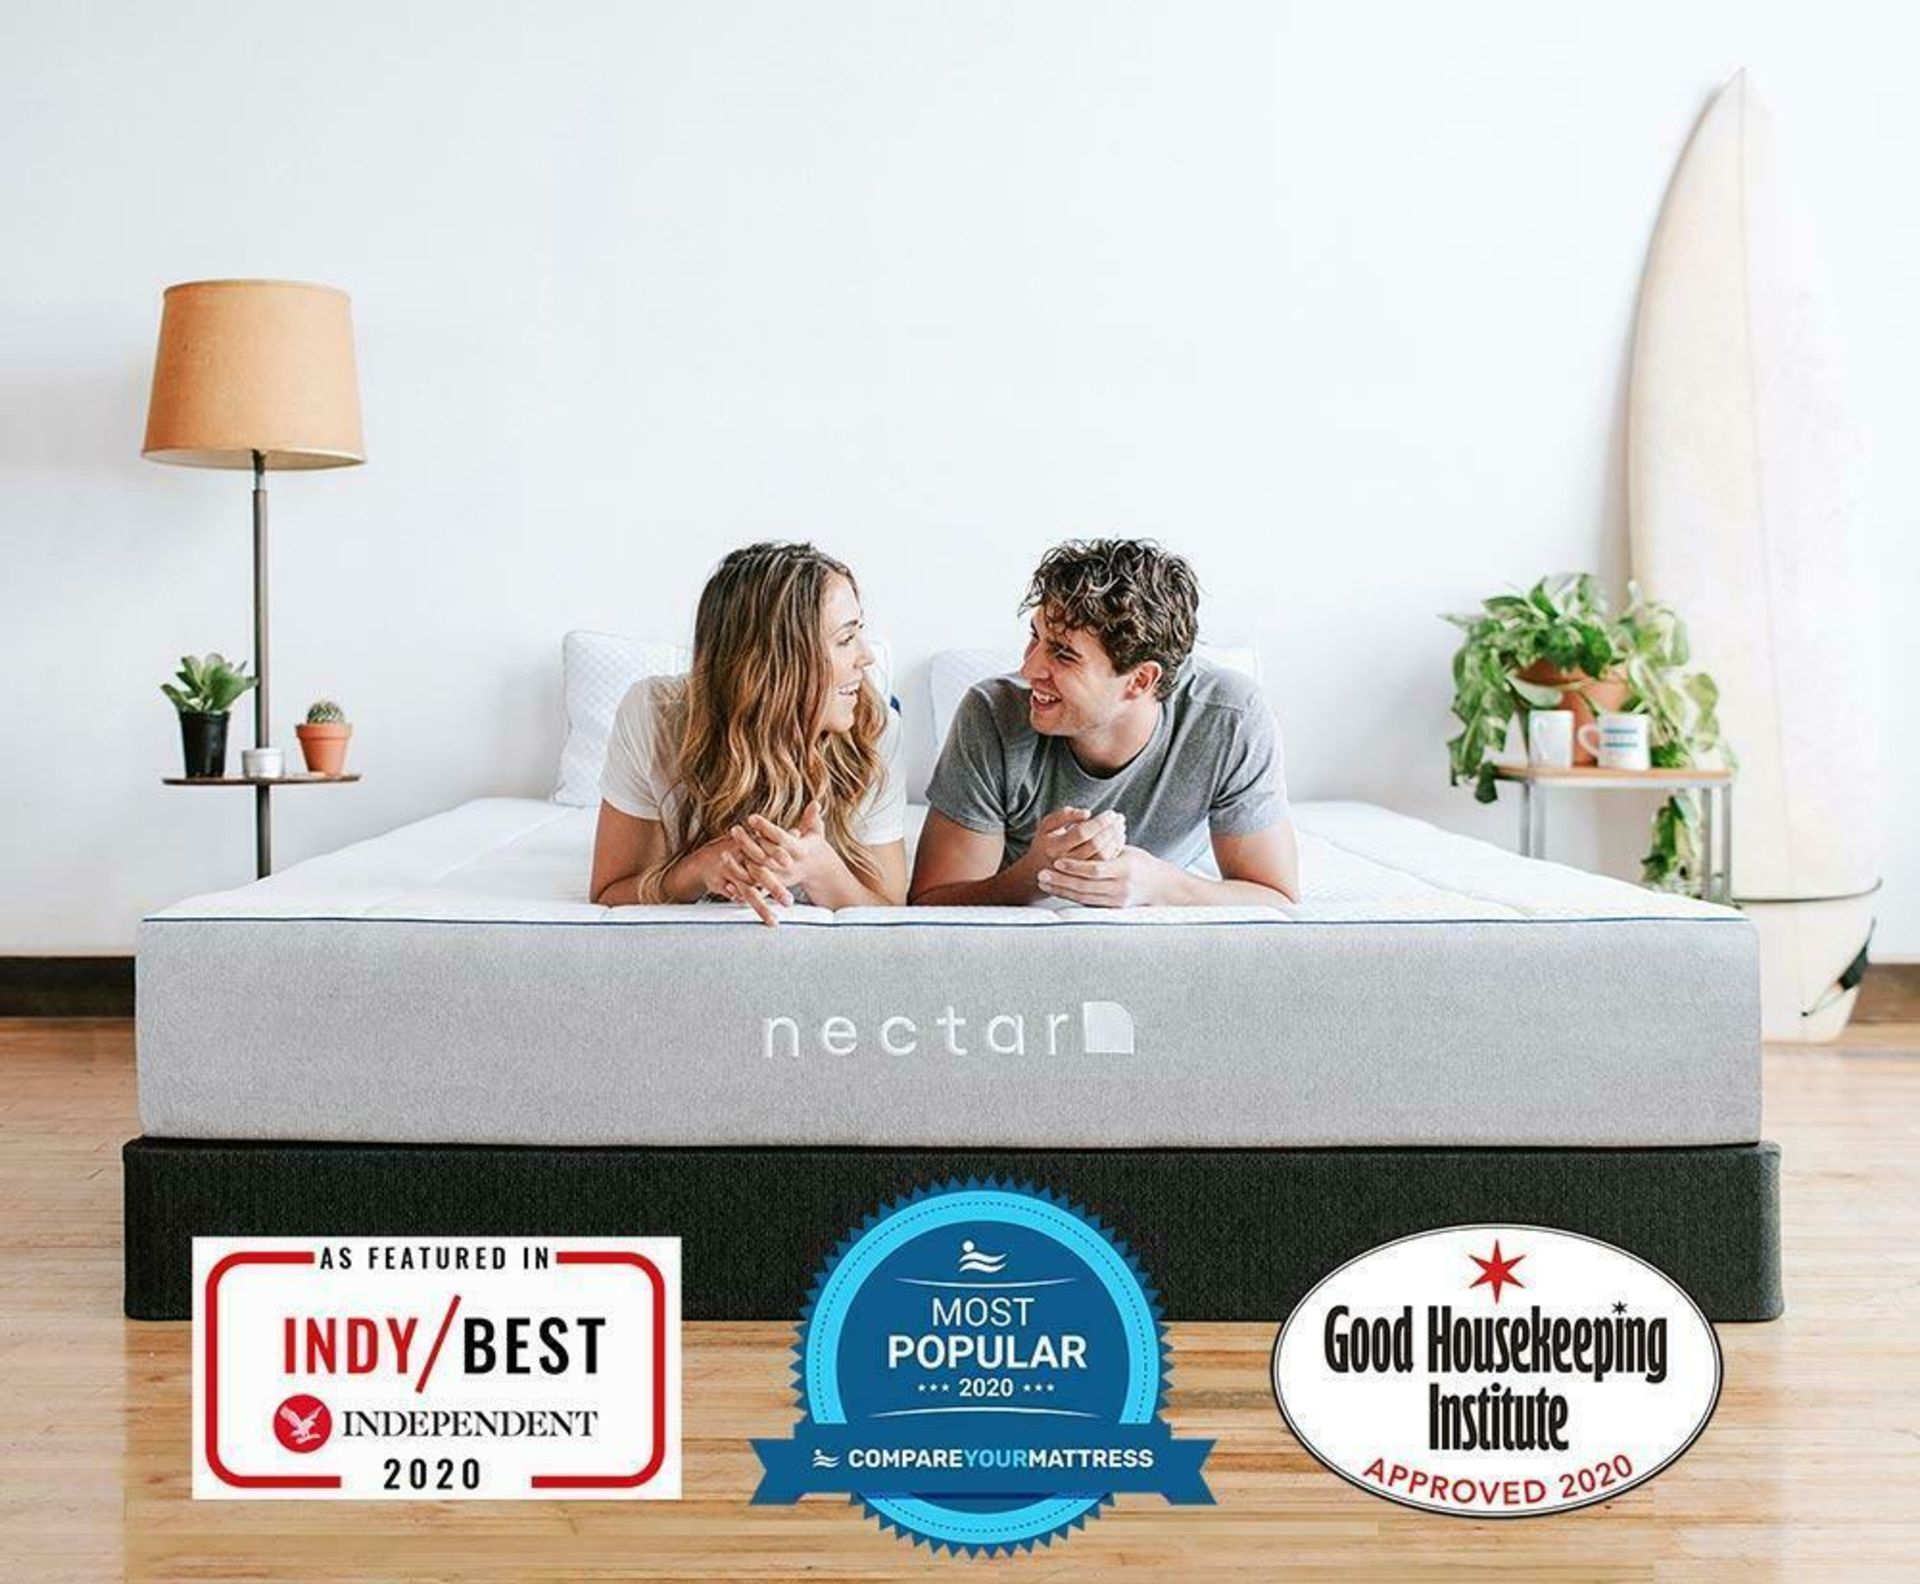 x1| 5ft Nectar Professionally Refurbished Smart Pressure Relieving Memory Foam Mattress|RRP £669|